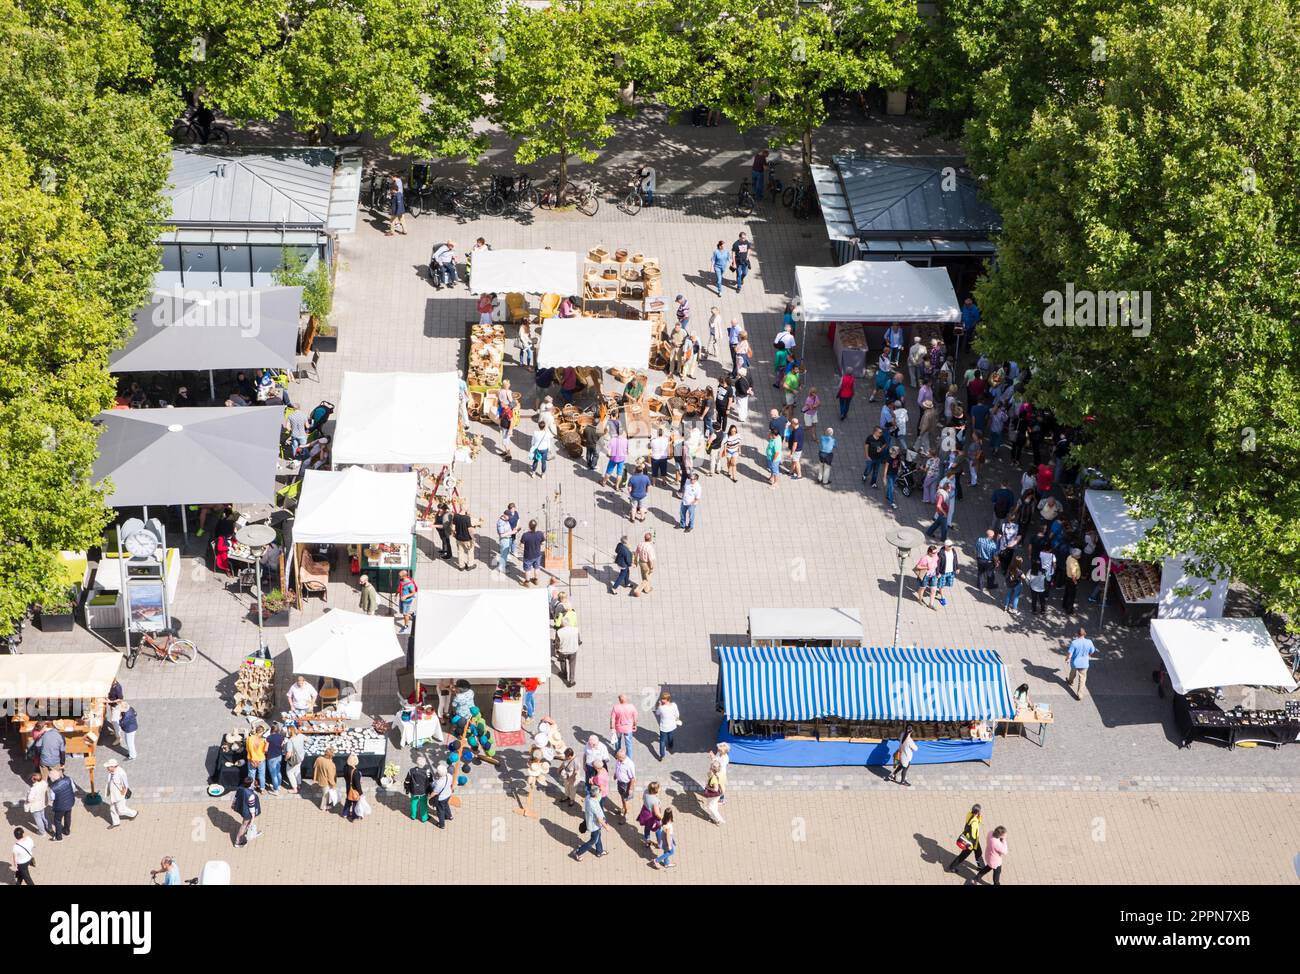 ERLANGEN, GERMANY - AUGUST 20: Aerial view over a market crowded with people in Erlangen, Germany on August 20, 2017 Stock Photo